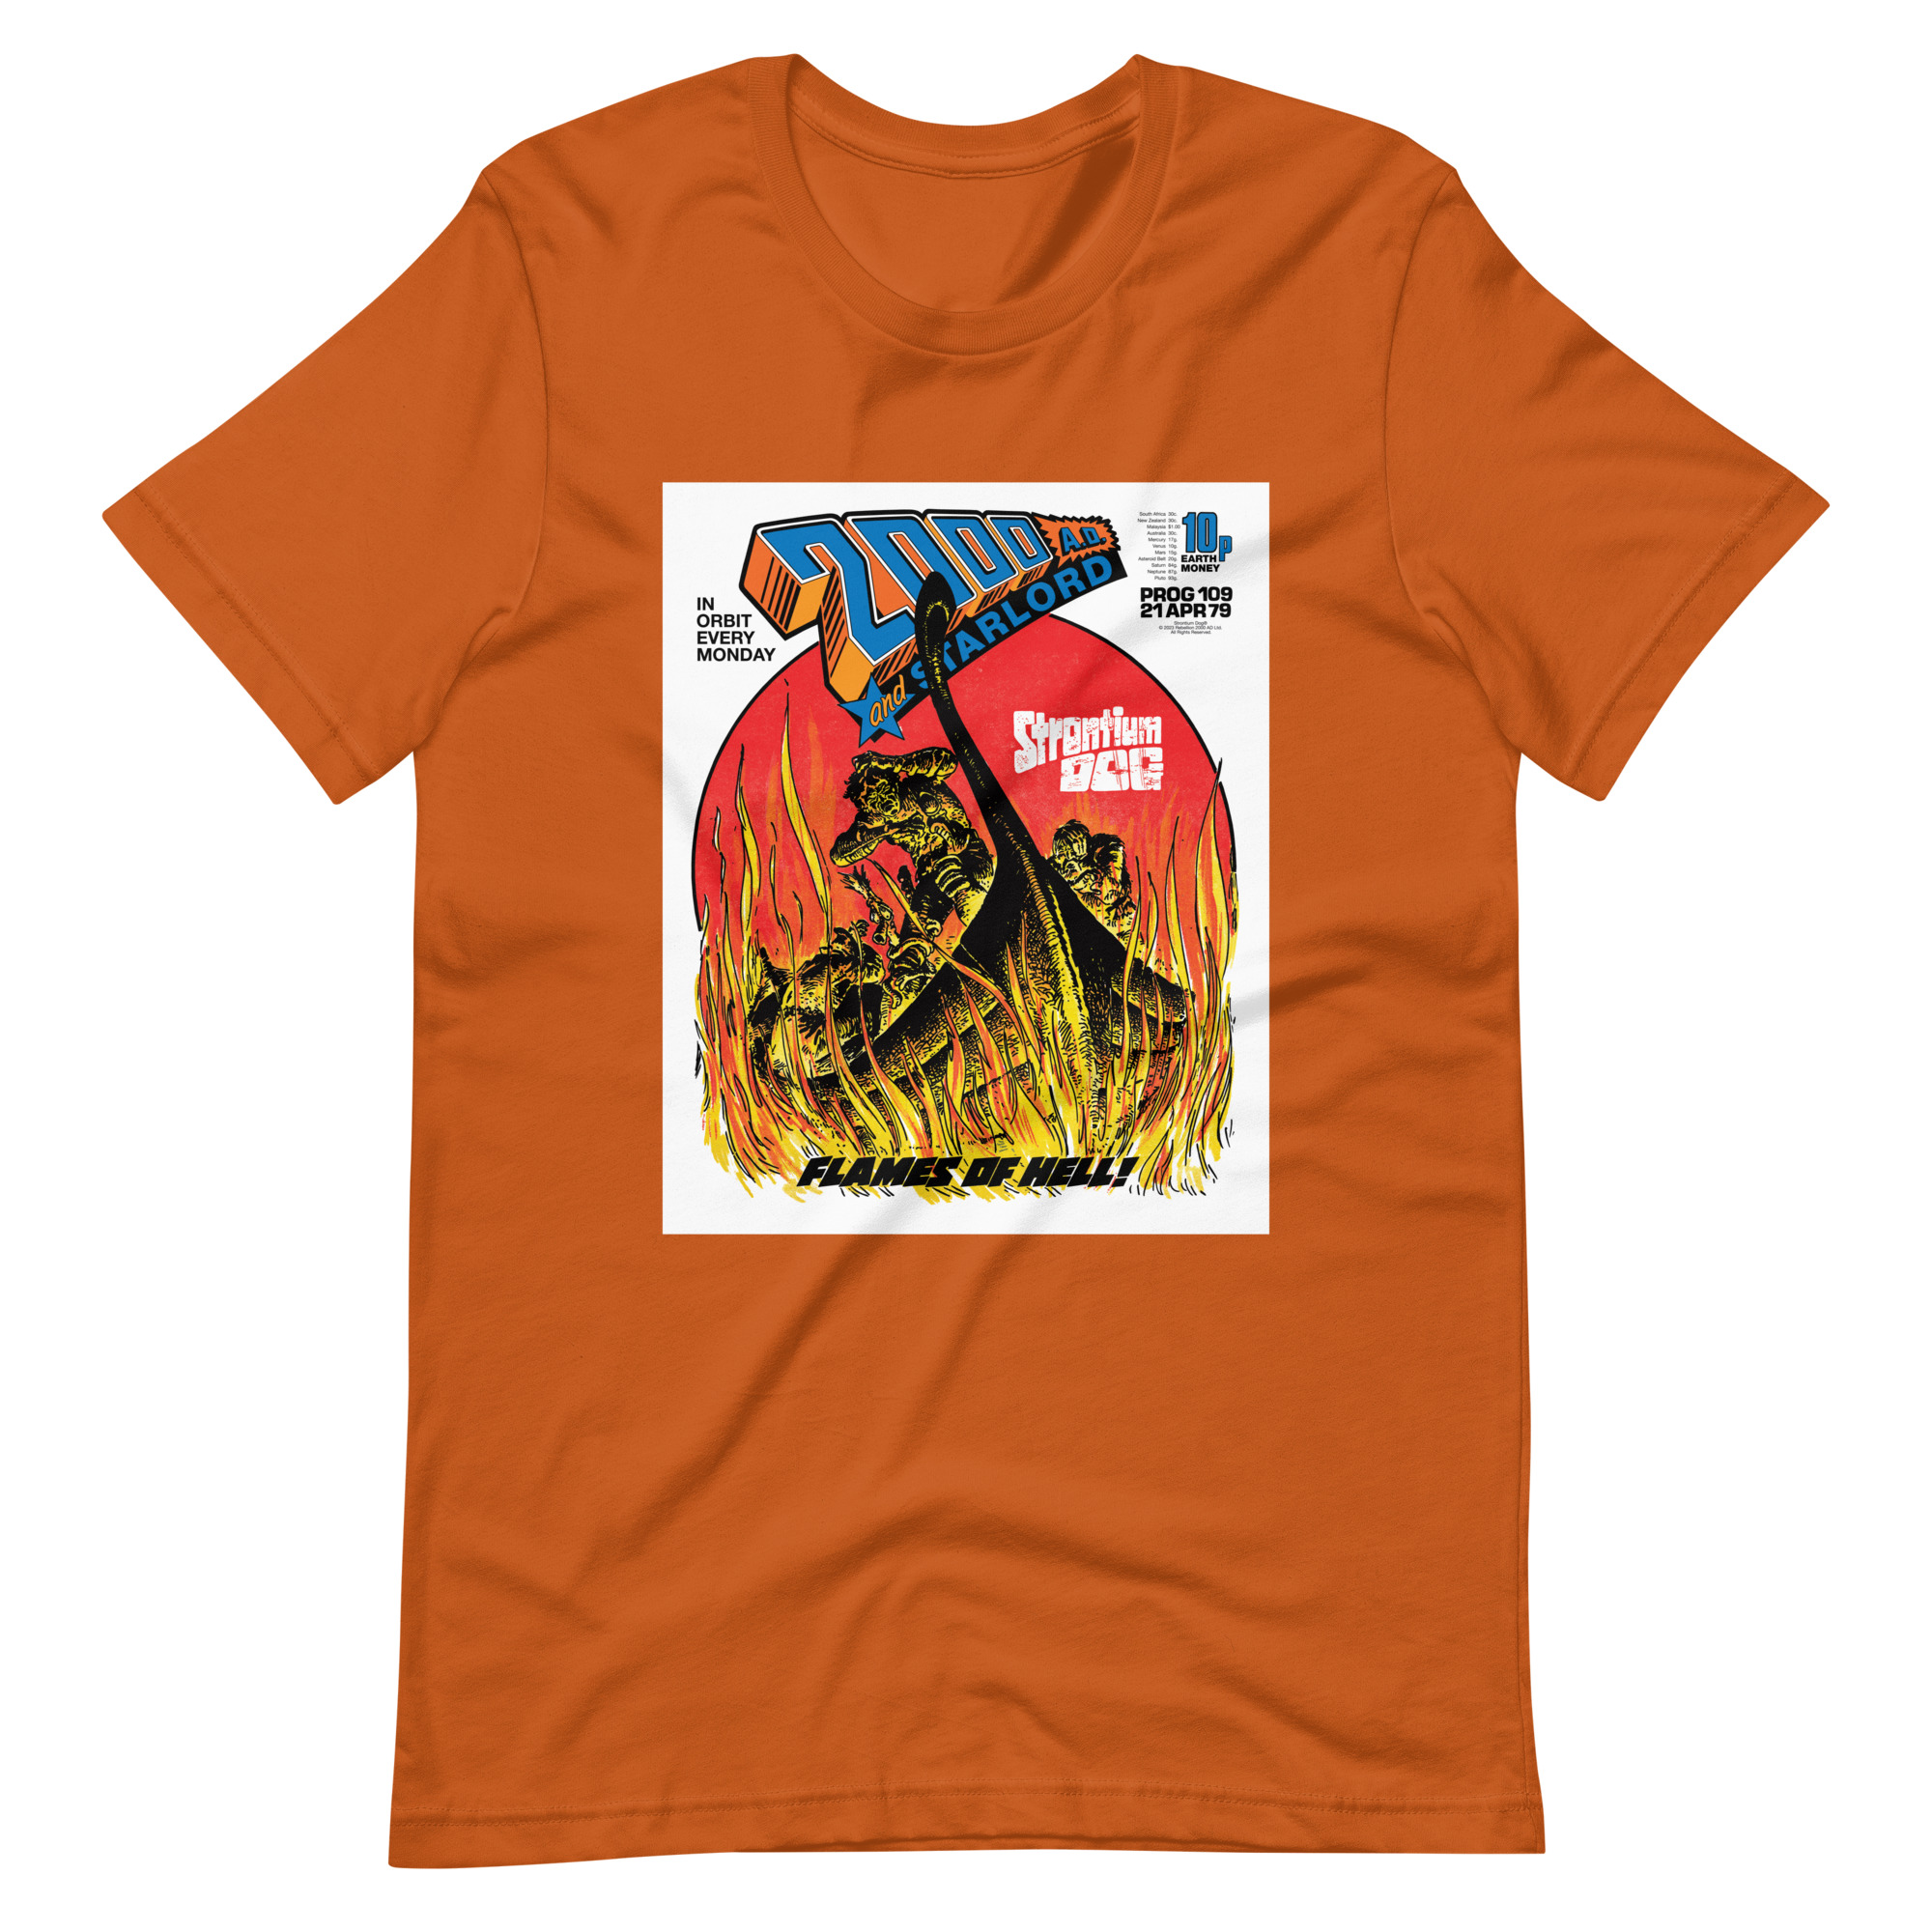 Orange Tshirt with an image on the chest. Image is cover of 2000 AD Prog 109 and shows a viking ship wreathed in flames